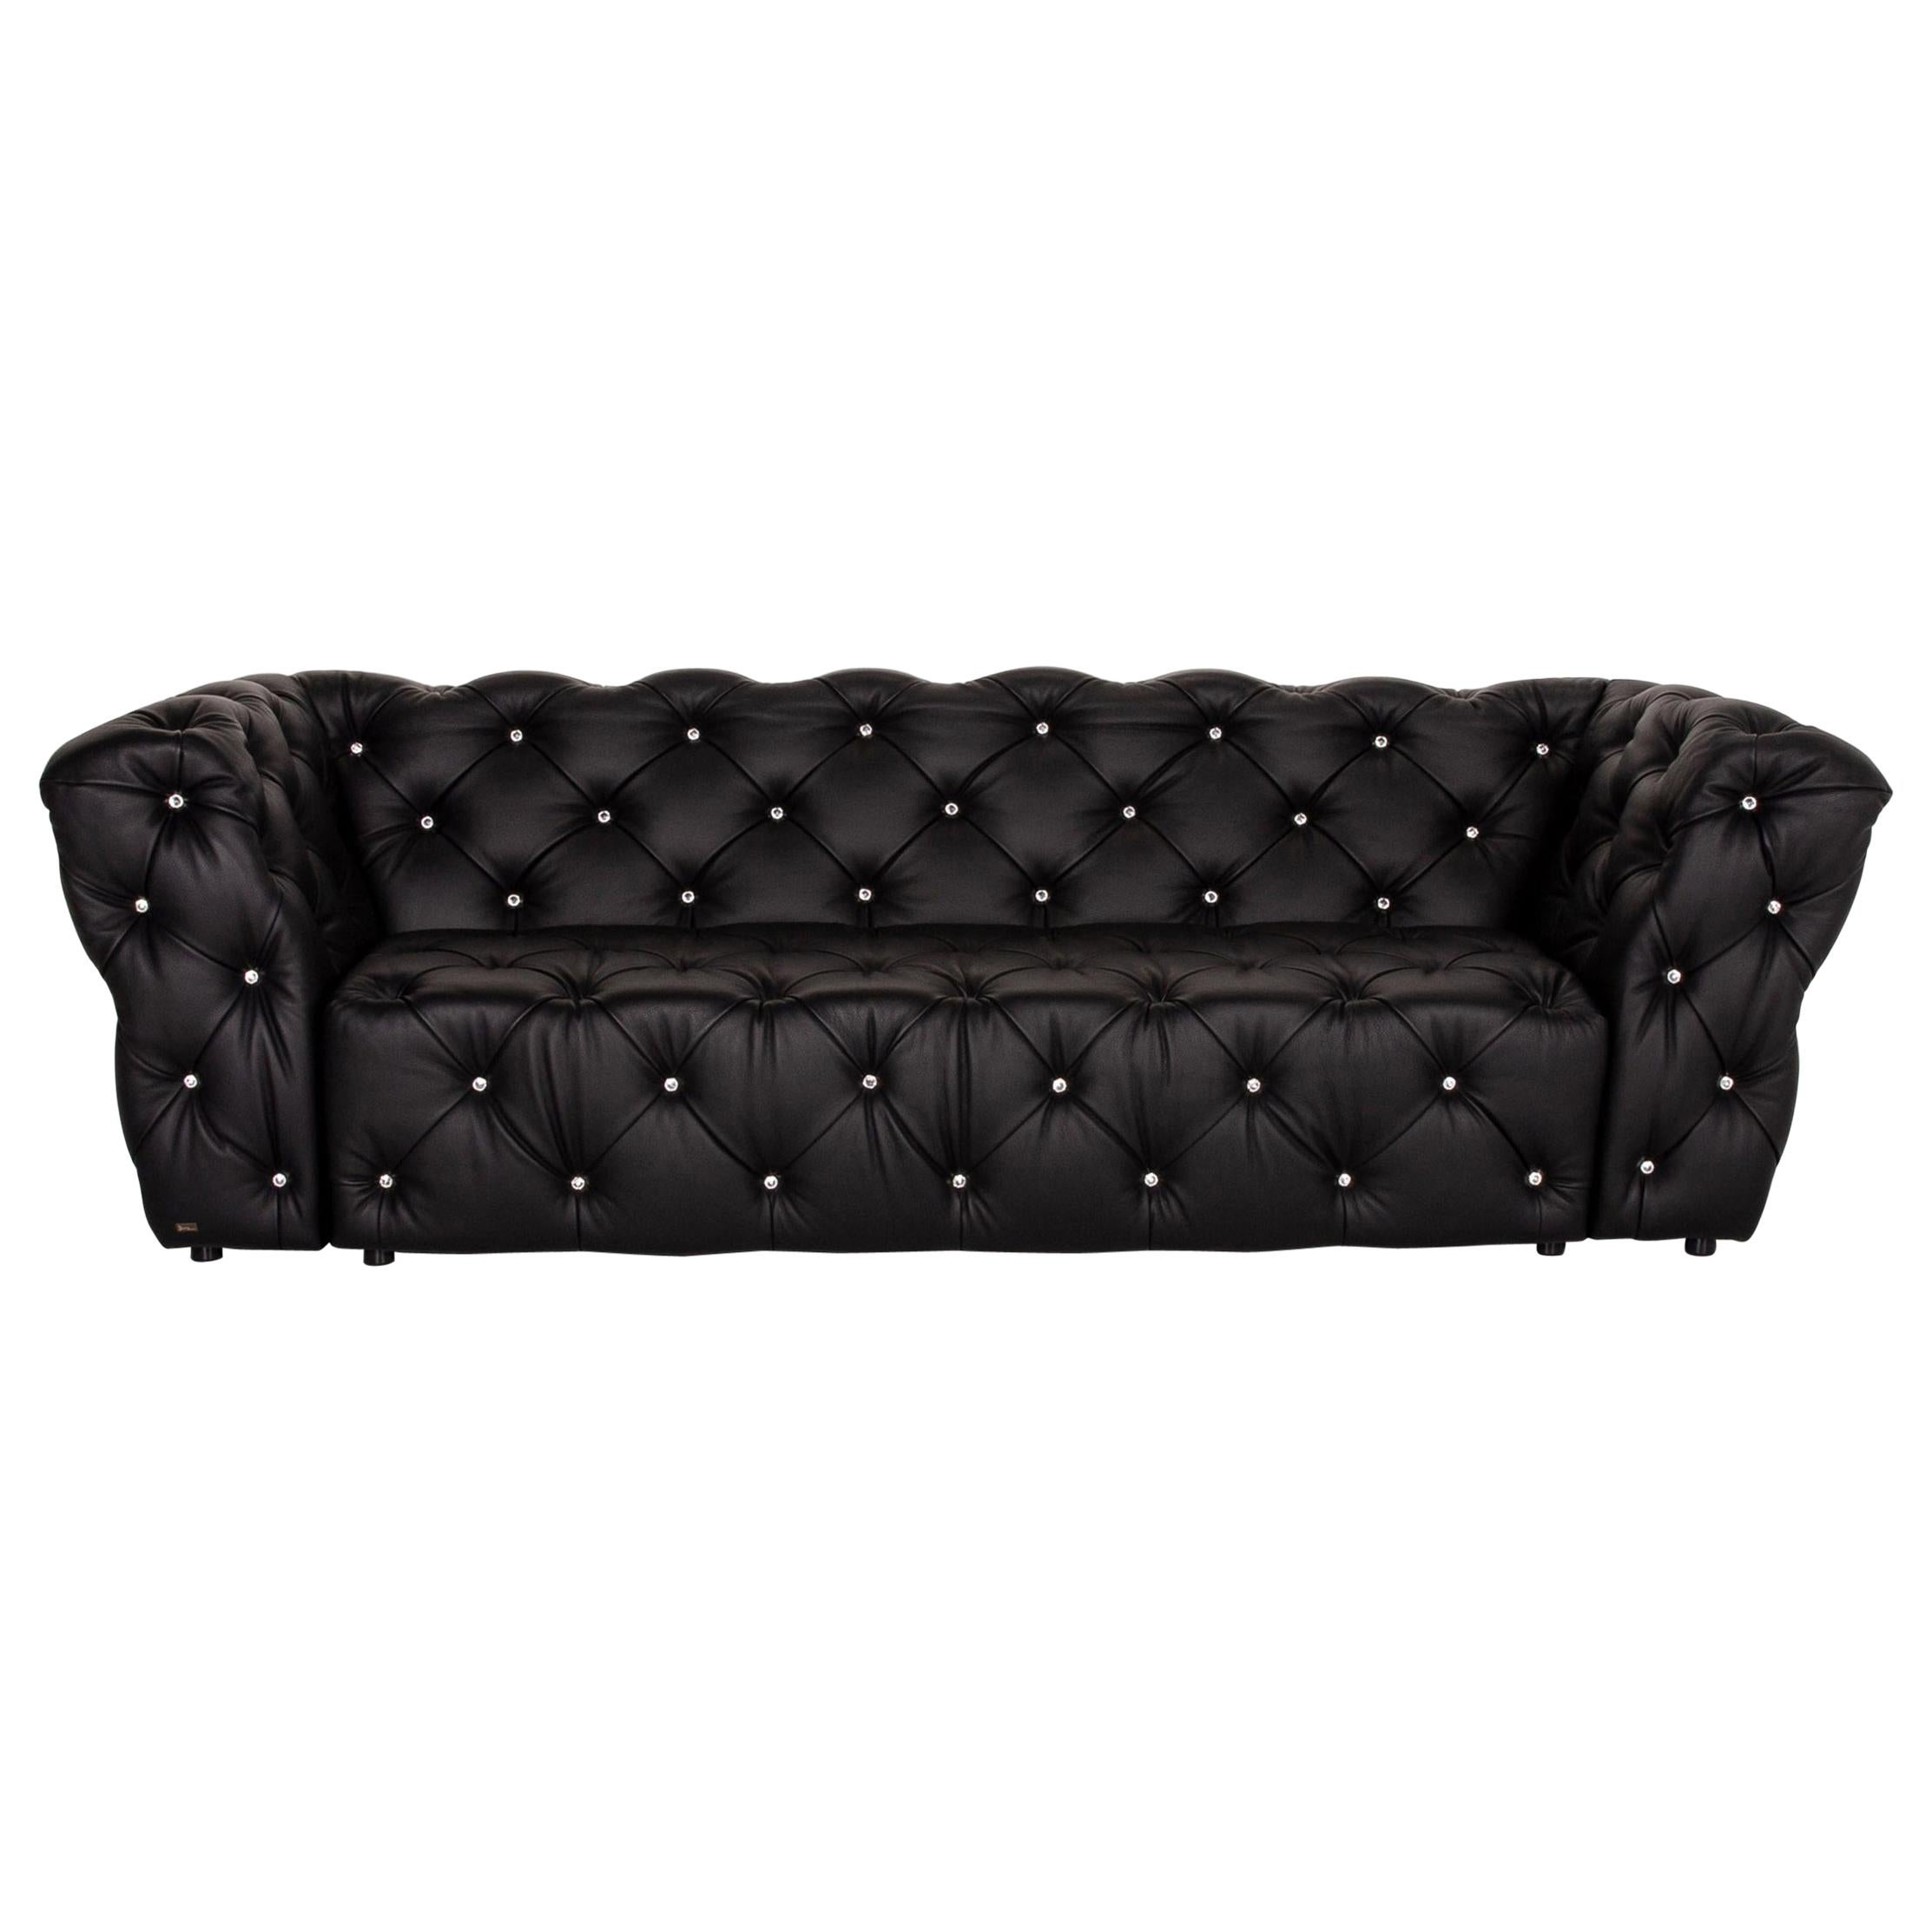 Marilyn Couch - 4 For Sale on 1stDibs | marilyn sofa